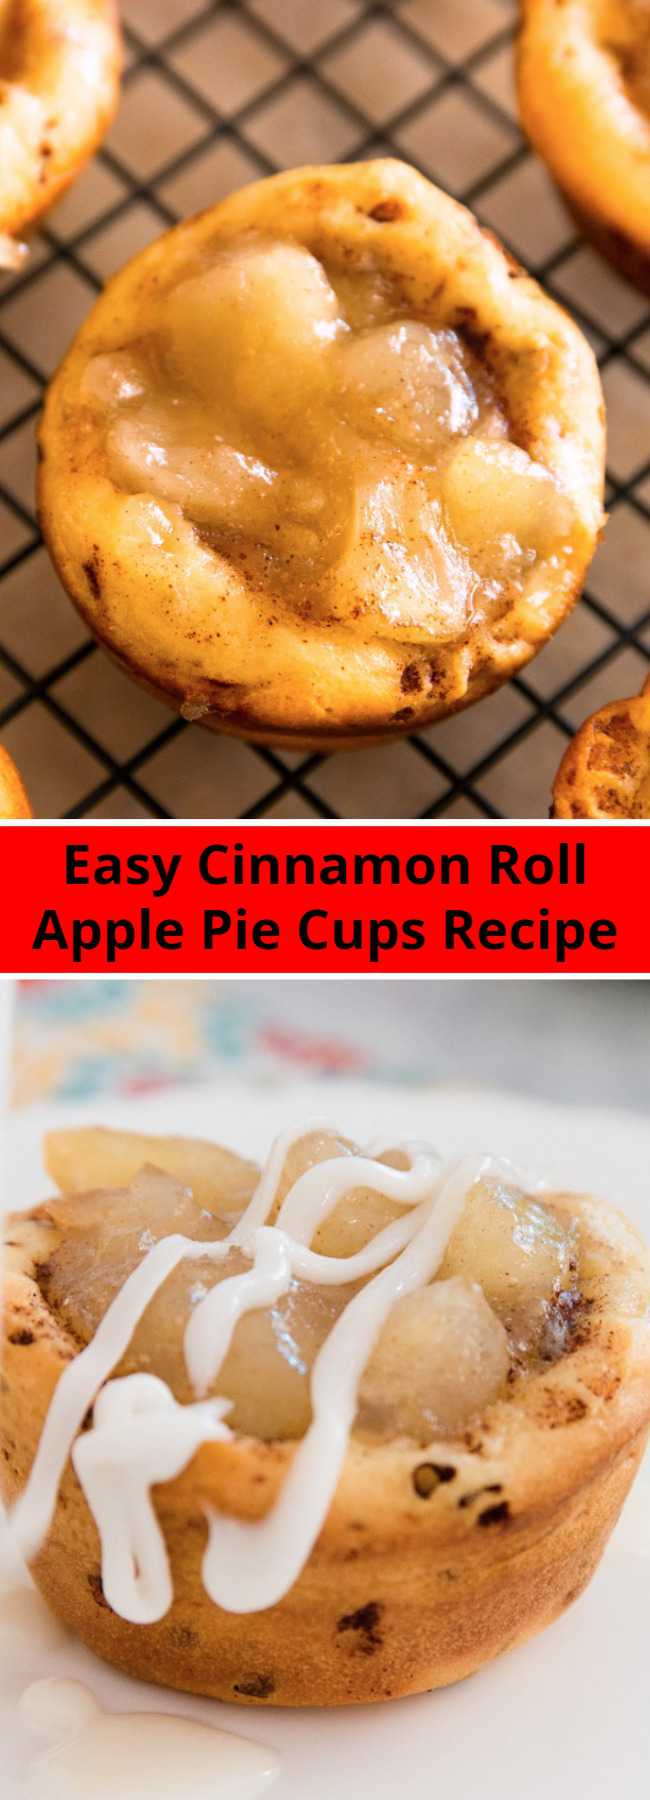 Easy Cinnamon Roll Apple Pie Cups Recipe - These Cinnamon Roll Apple Pie Cups are always a hit with their pillowy soft crust and velvety filling! This easy apple dessert needs just 3 ingredients and is ready in 25 minutes. They’re fabulous anytime and perfect for parties, potlucks and holidays!